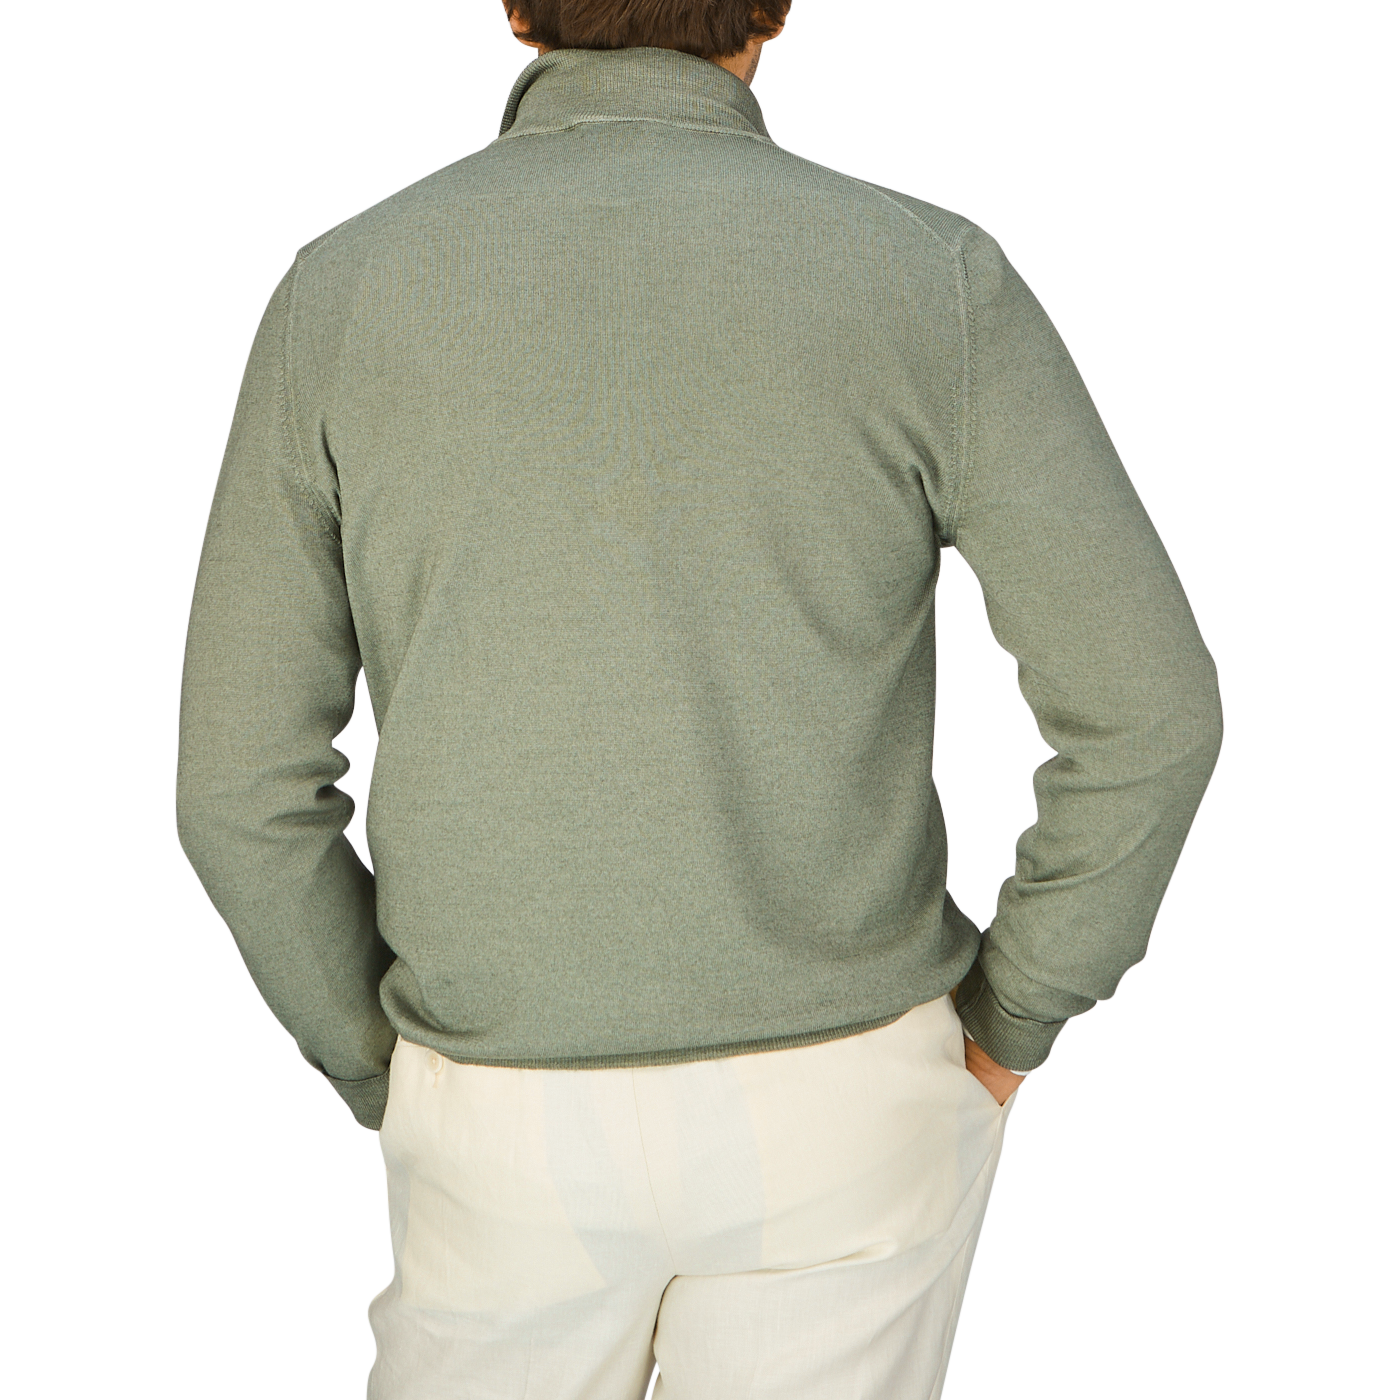 The back view of a man wearing a Gran Sasso Grass Green Vintage Merino Wool 1/4 Zip Sweater and white pants.